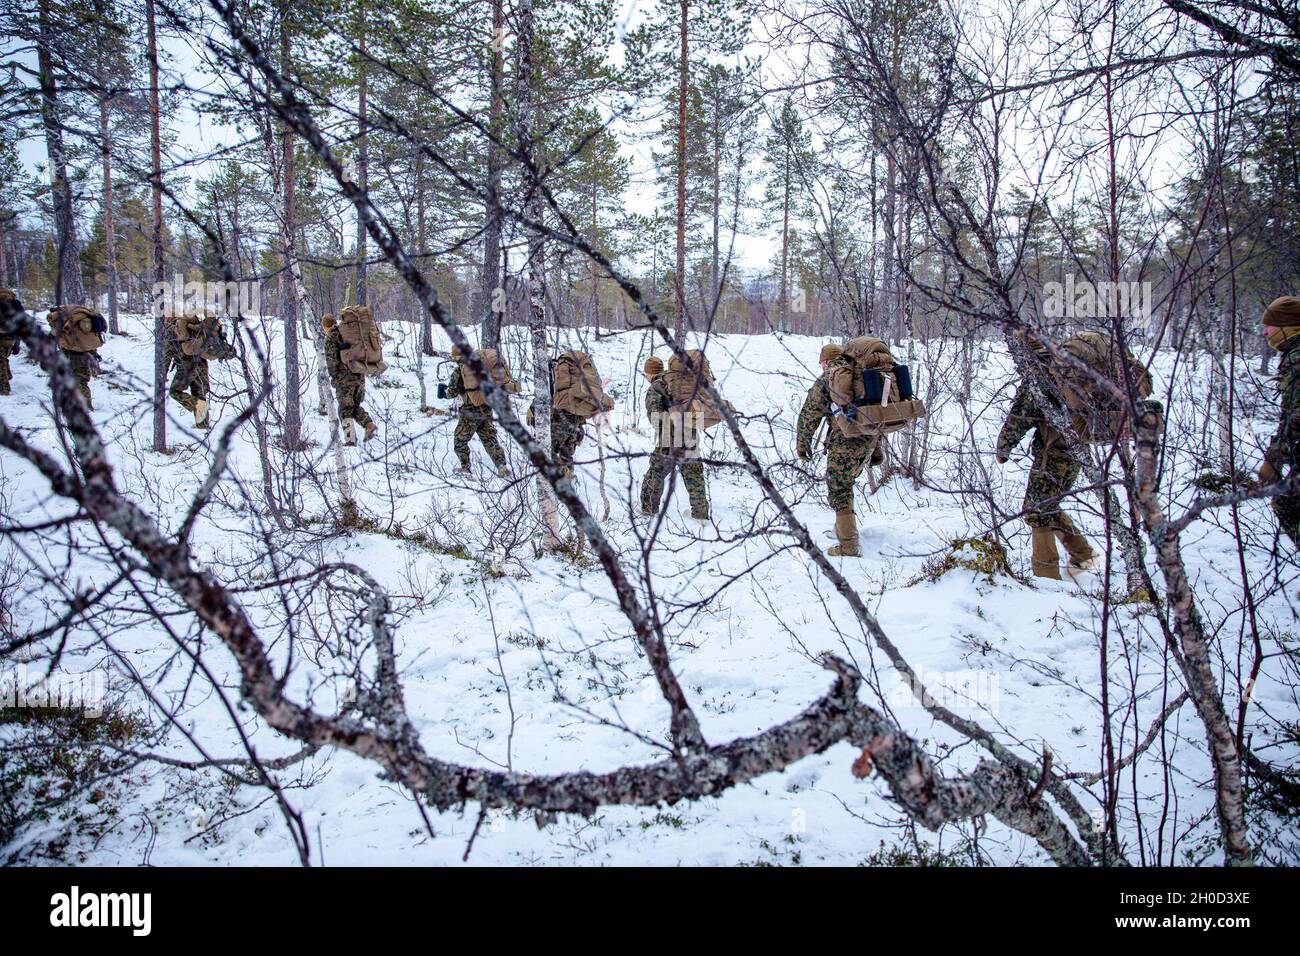 Marines with the 26th Marine Expeditionary Unit navigate through snow-covered woods during cold weather training led by Norwegian Army instructors, at Setermoen, Norway, Jan. 28, 2021. The training focused on familiarization of survival methods in extreme cold weather conditions. The training also enhances interoperability with allies and partners around the world. Stock Photo